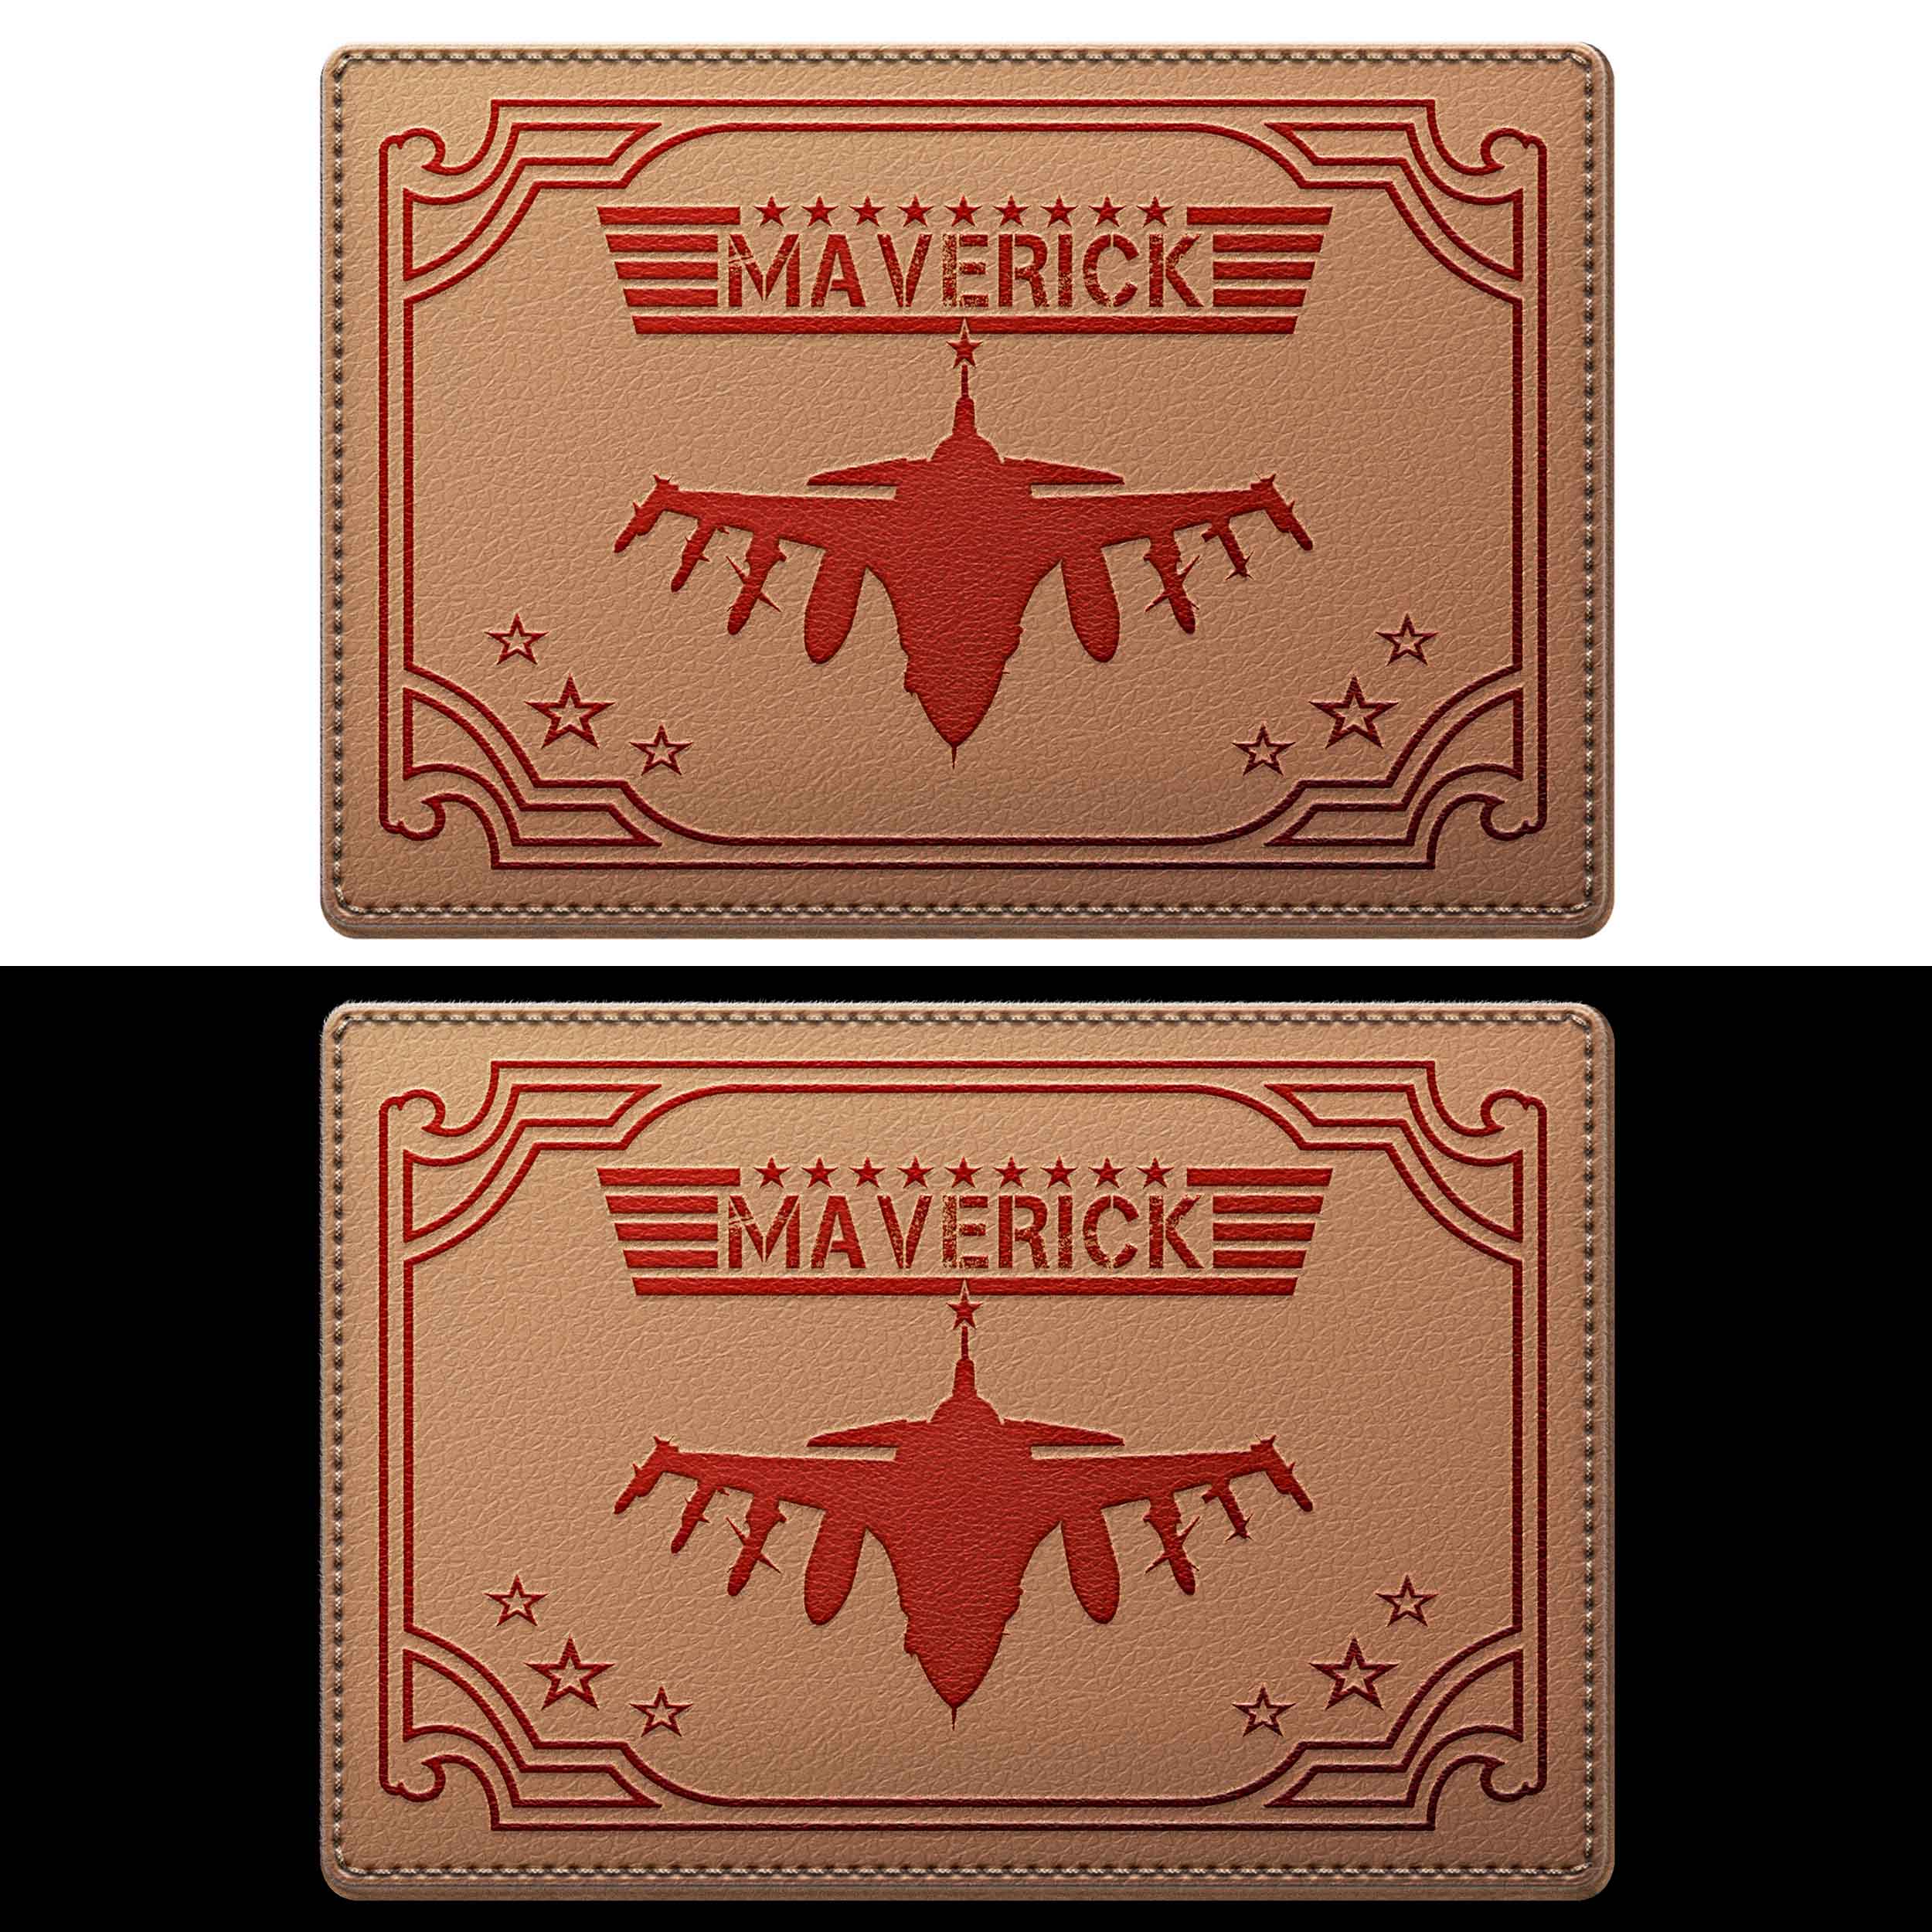 maverick leather badge effect for t-shirts and caps